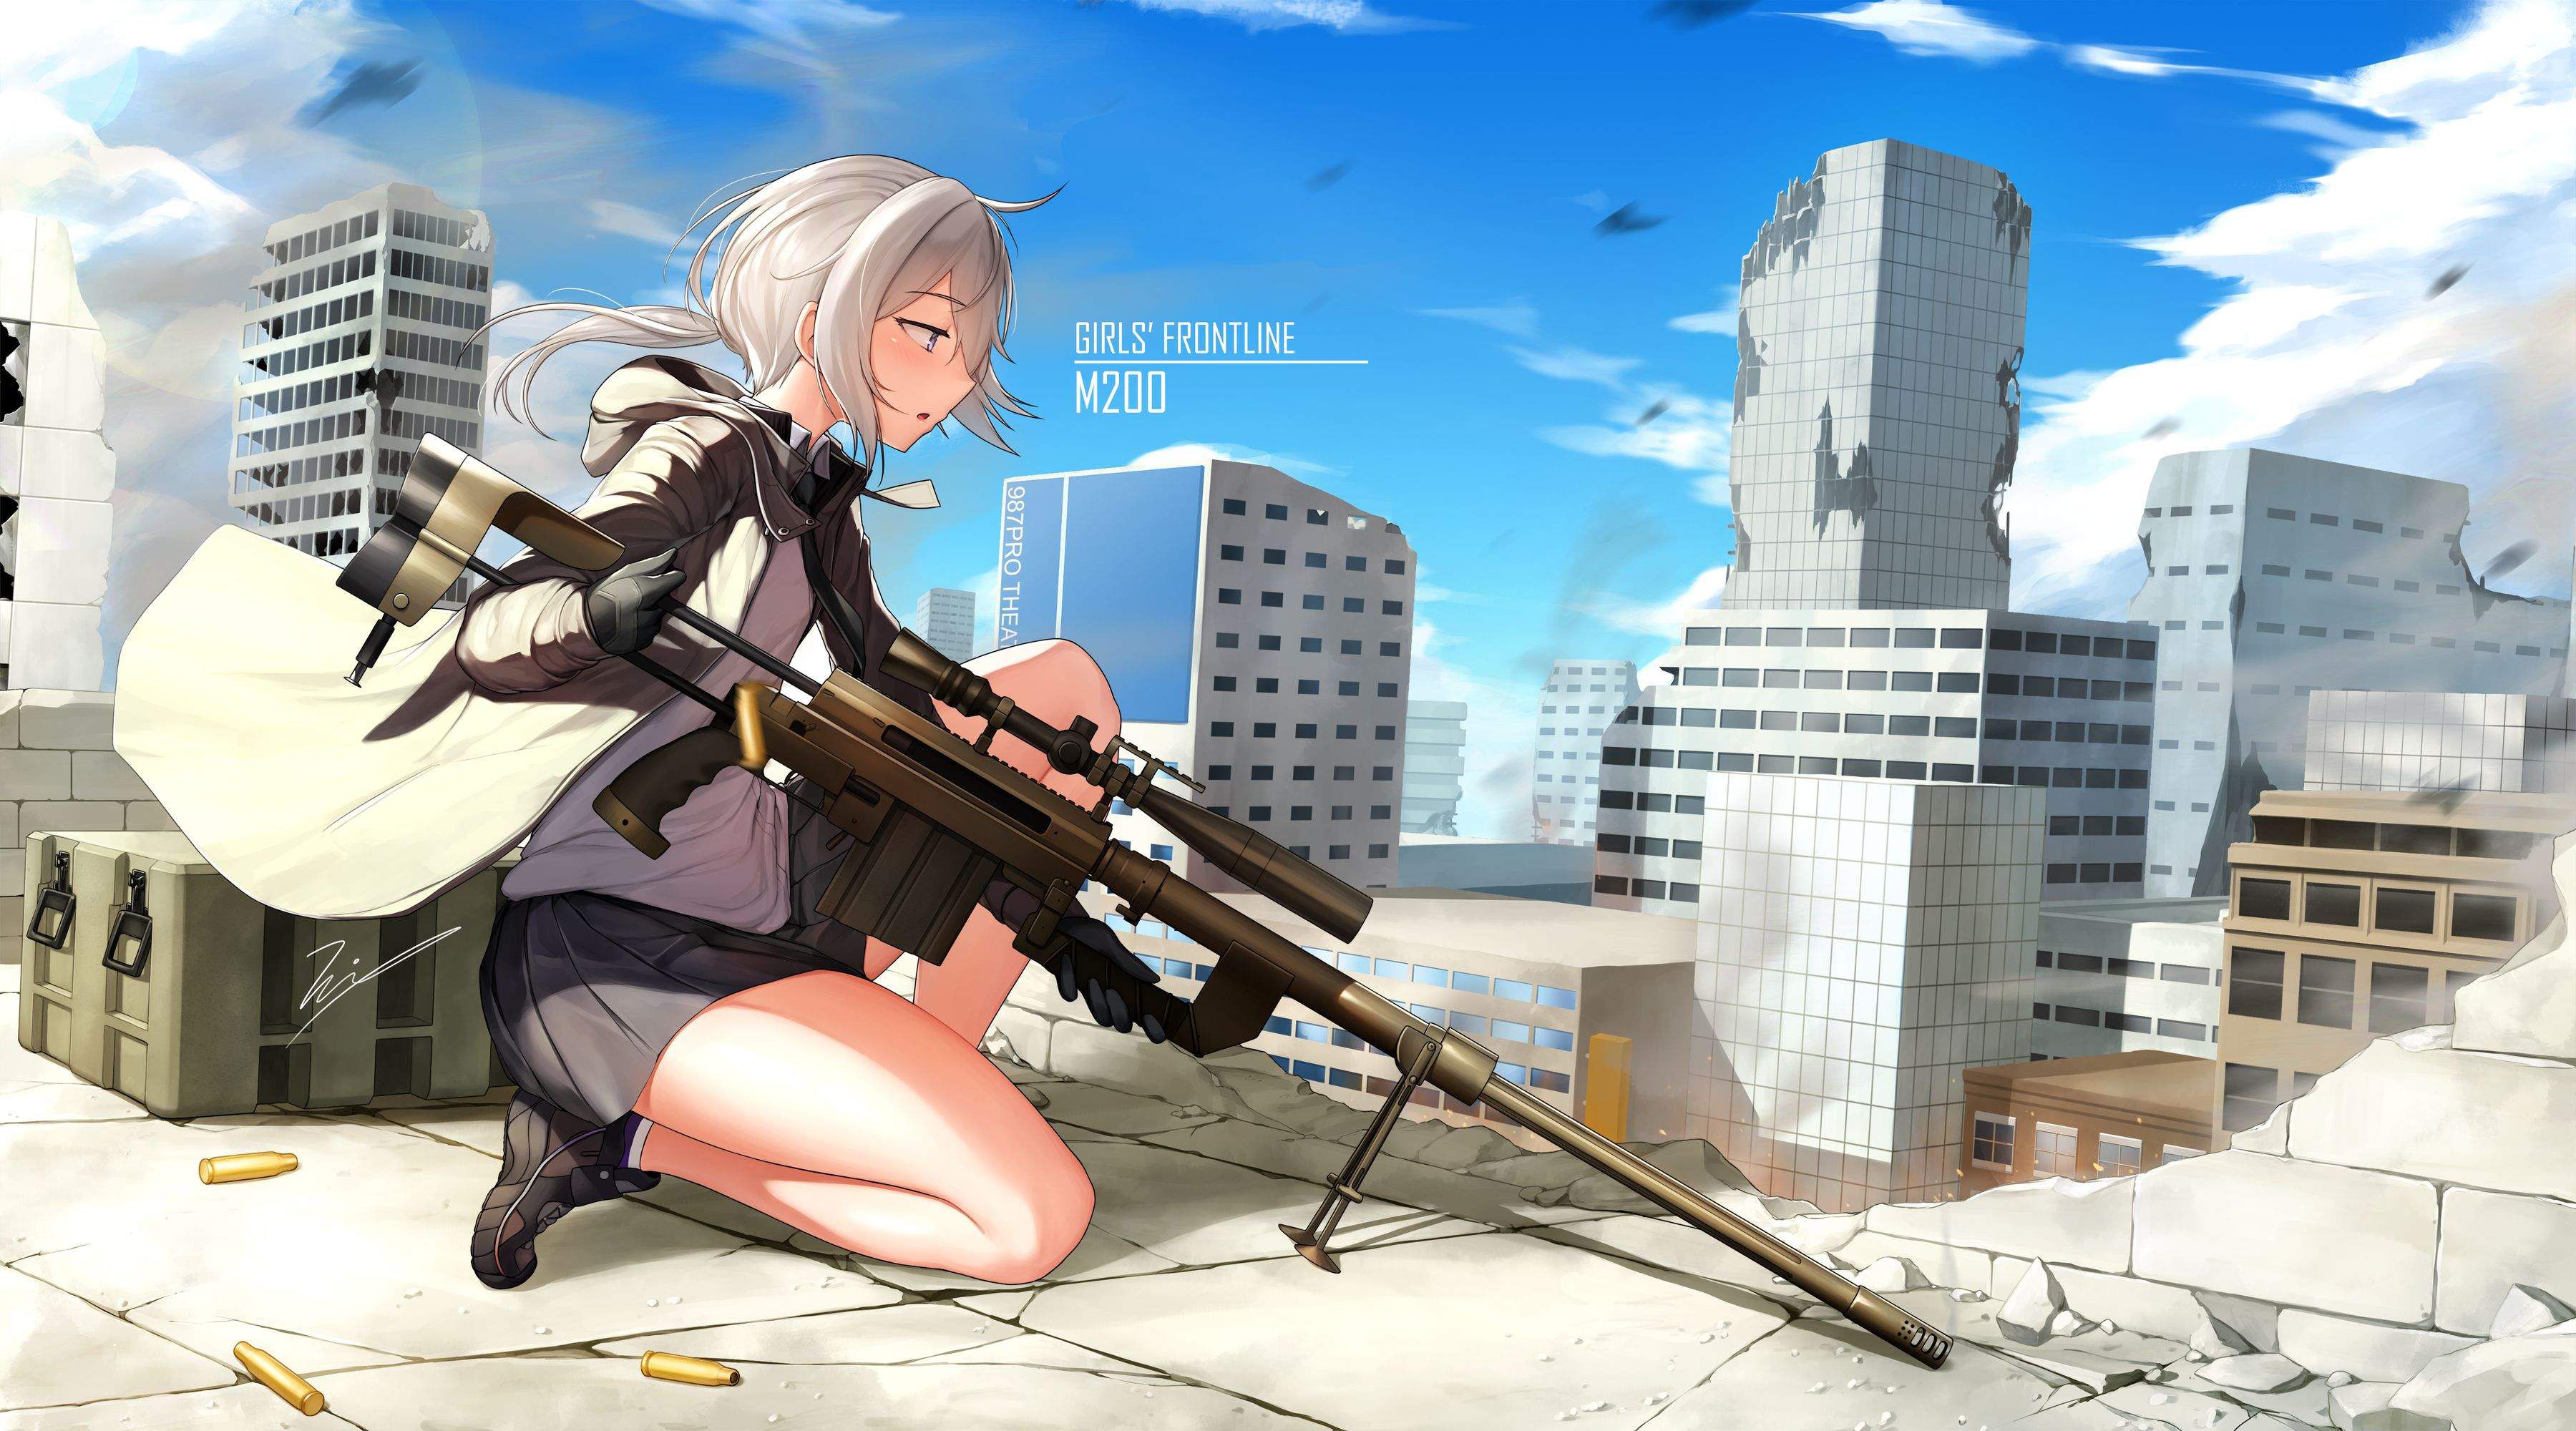 I collected onaneta images of dolls frontline (girl front)! ! 4